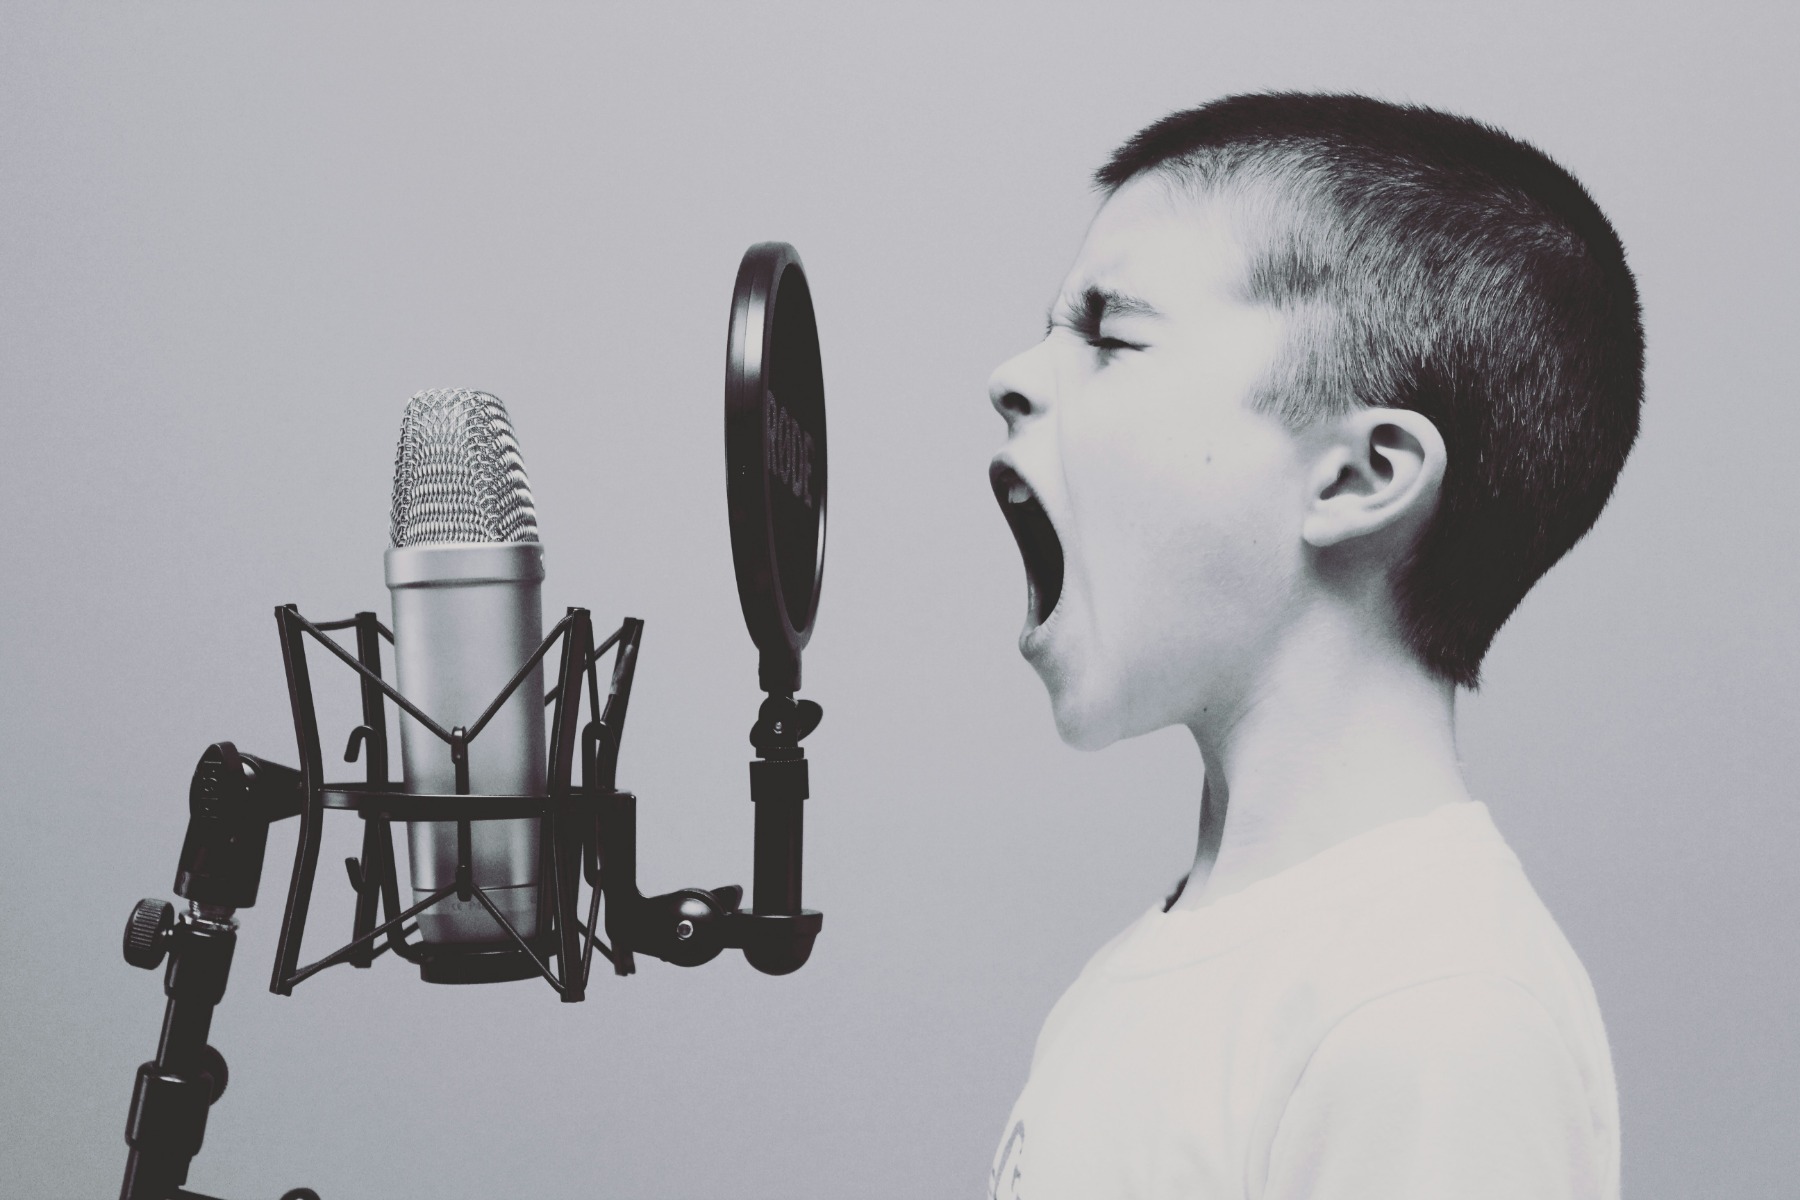 A black and white photograph of a boy shouting into a microphone